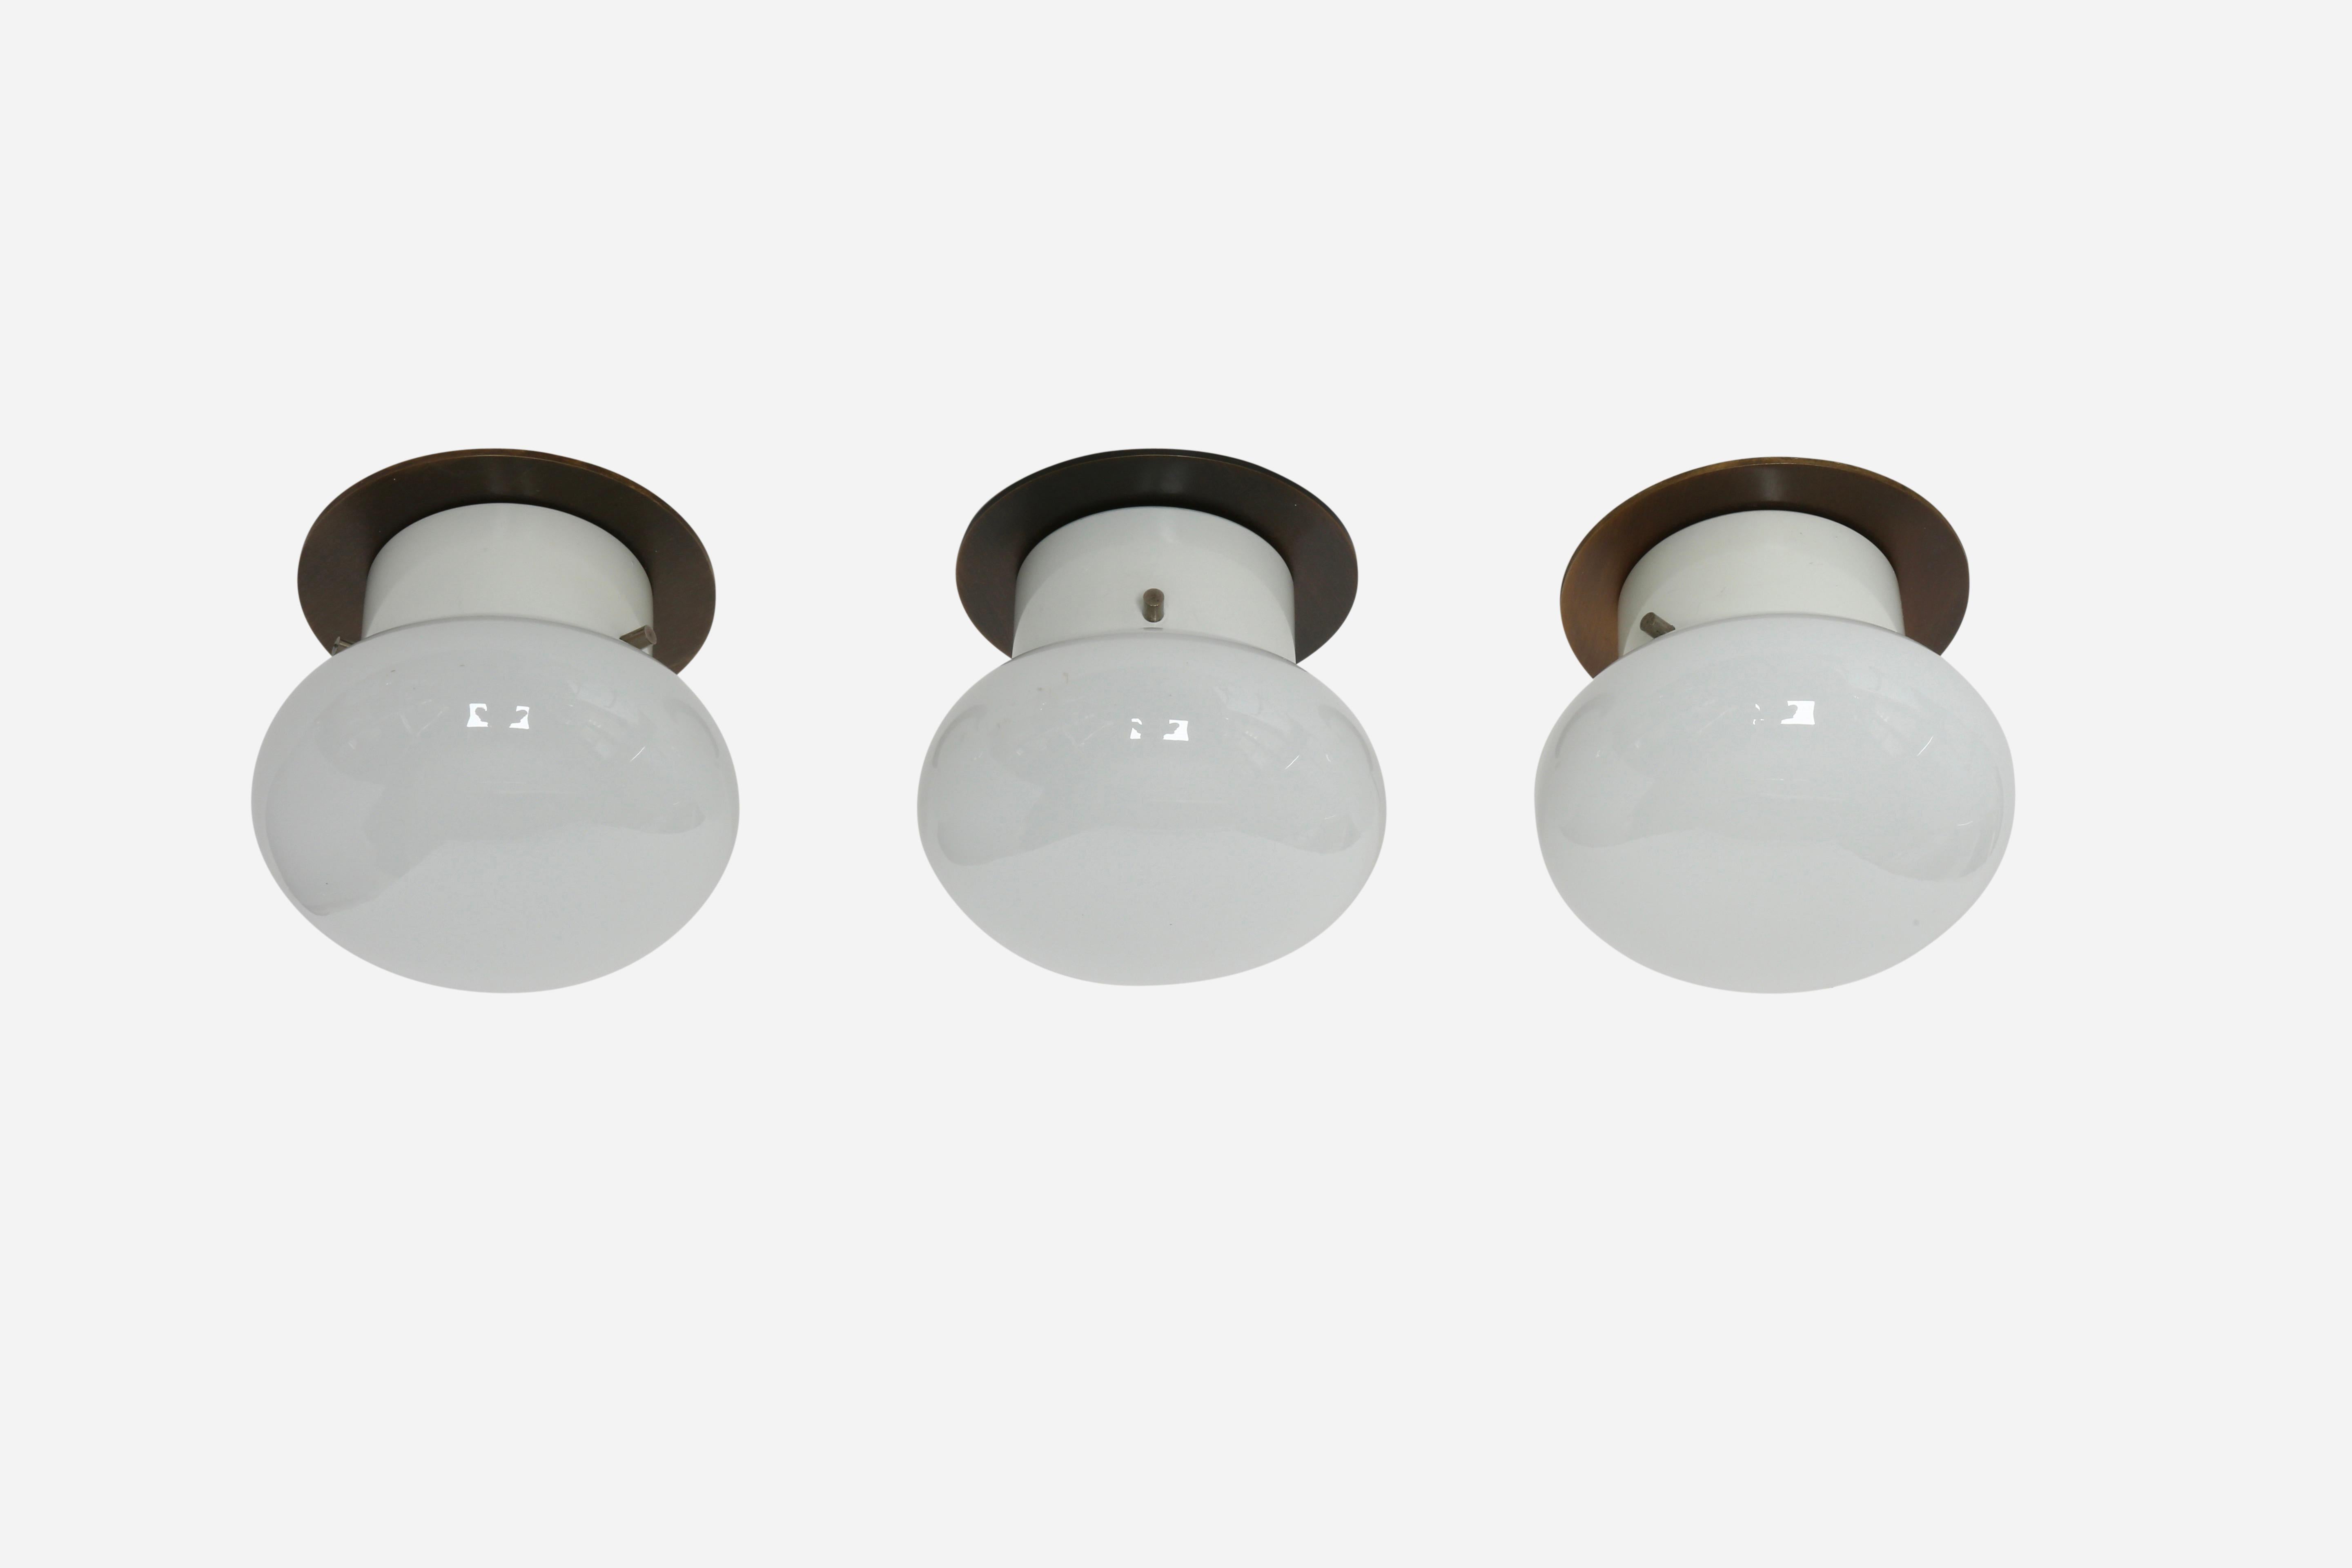 Enameled Italian sconces by Studio Tetrarch for Valenti, set of 3 attributed